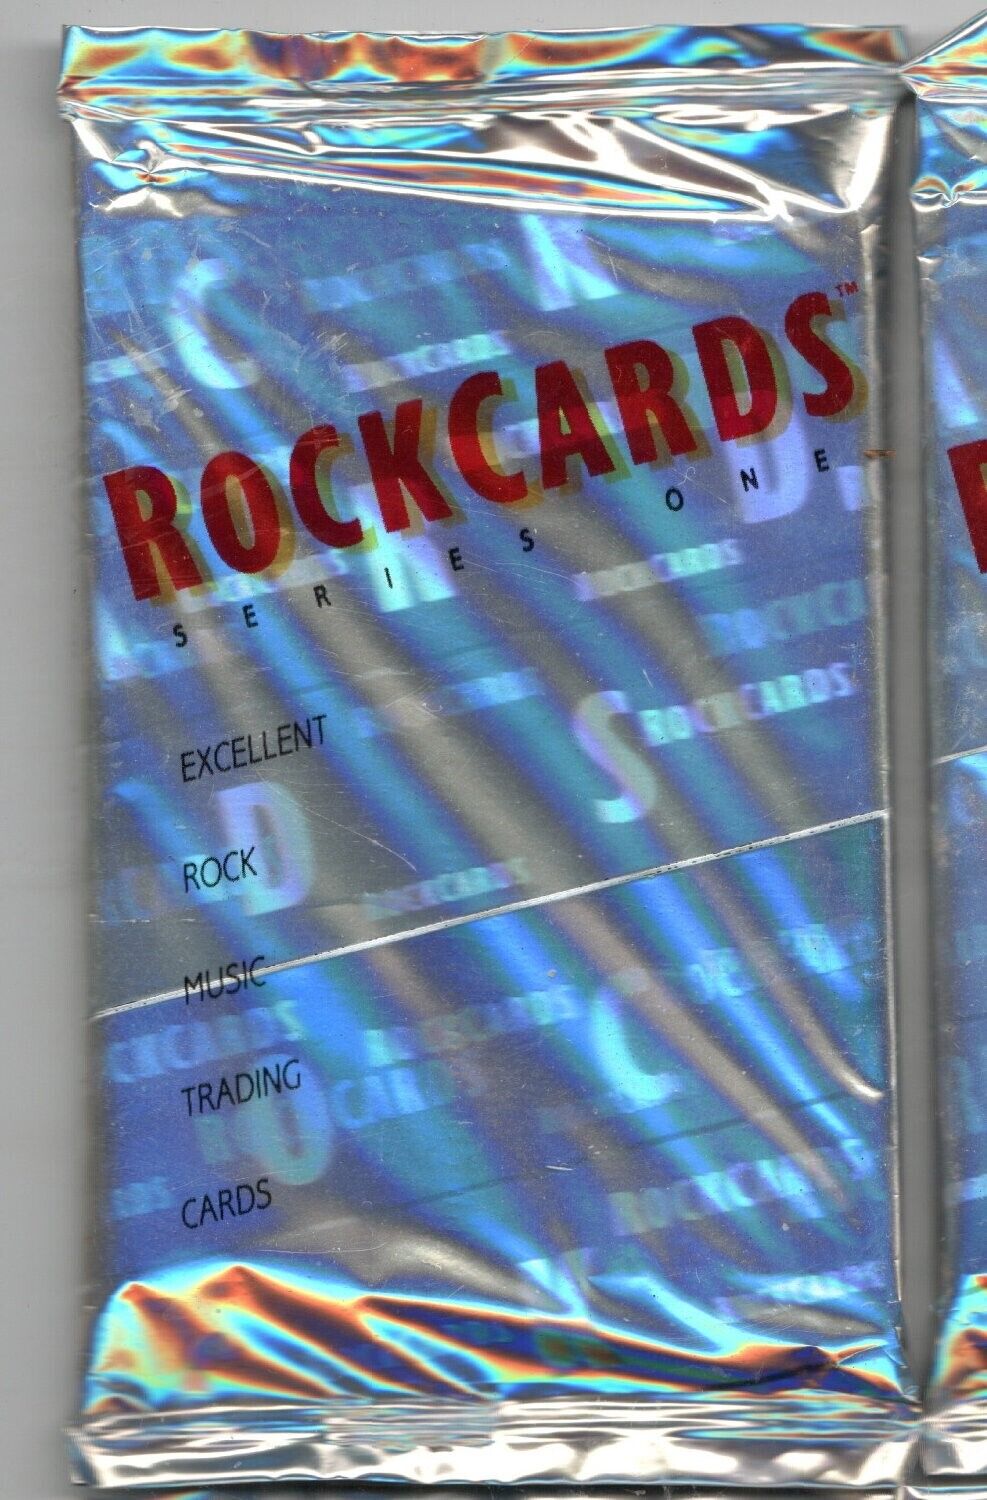 1991 ROCKCARDS SEALED PACKS ROCK MUSIC CARDS AC/DC, POISON COOPER TRADING CARDS